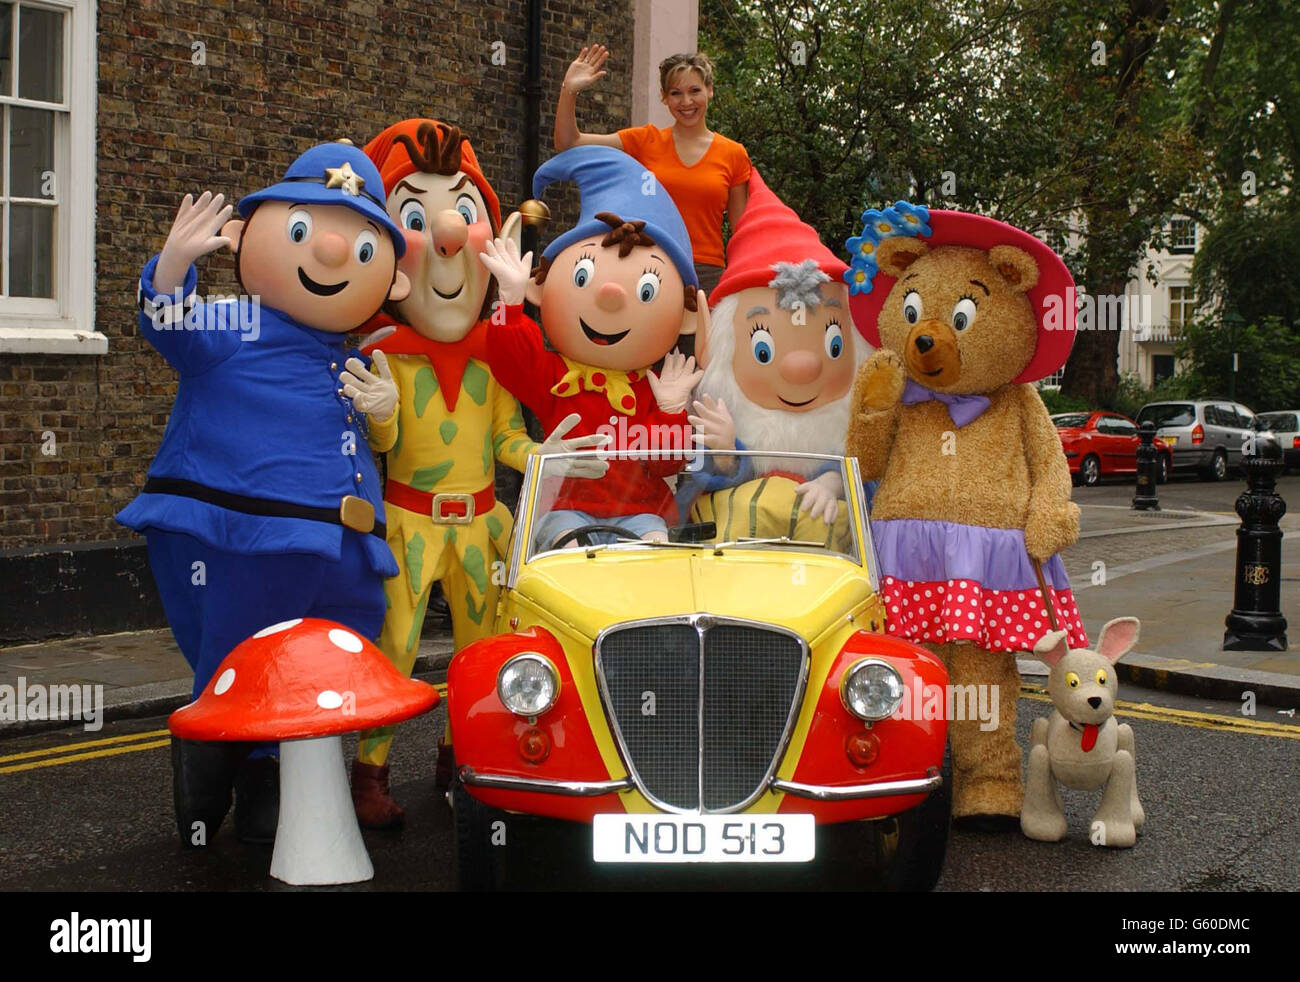 Top 999+ noddy images – Amazing Collection noddy images Full 4K